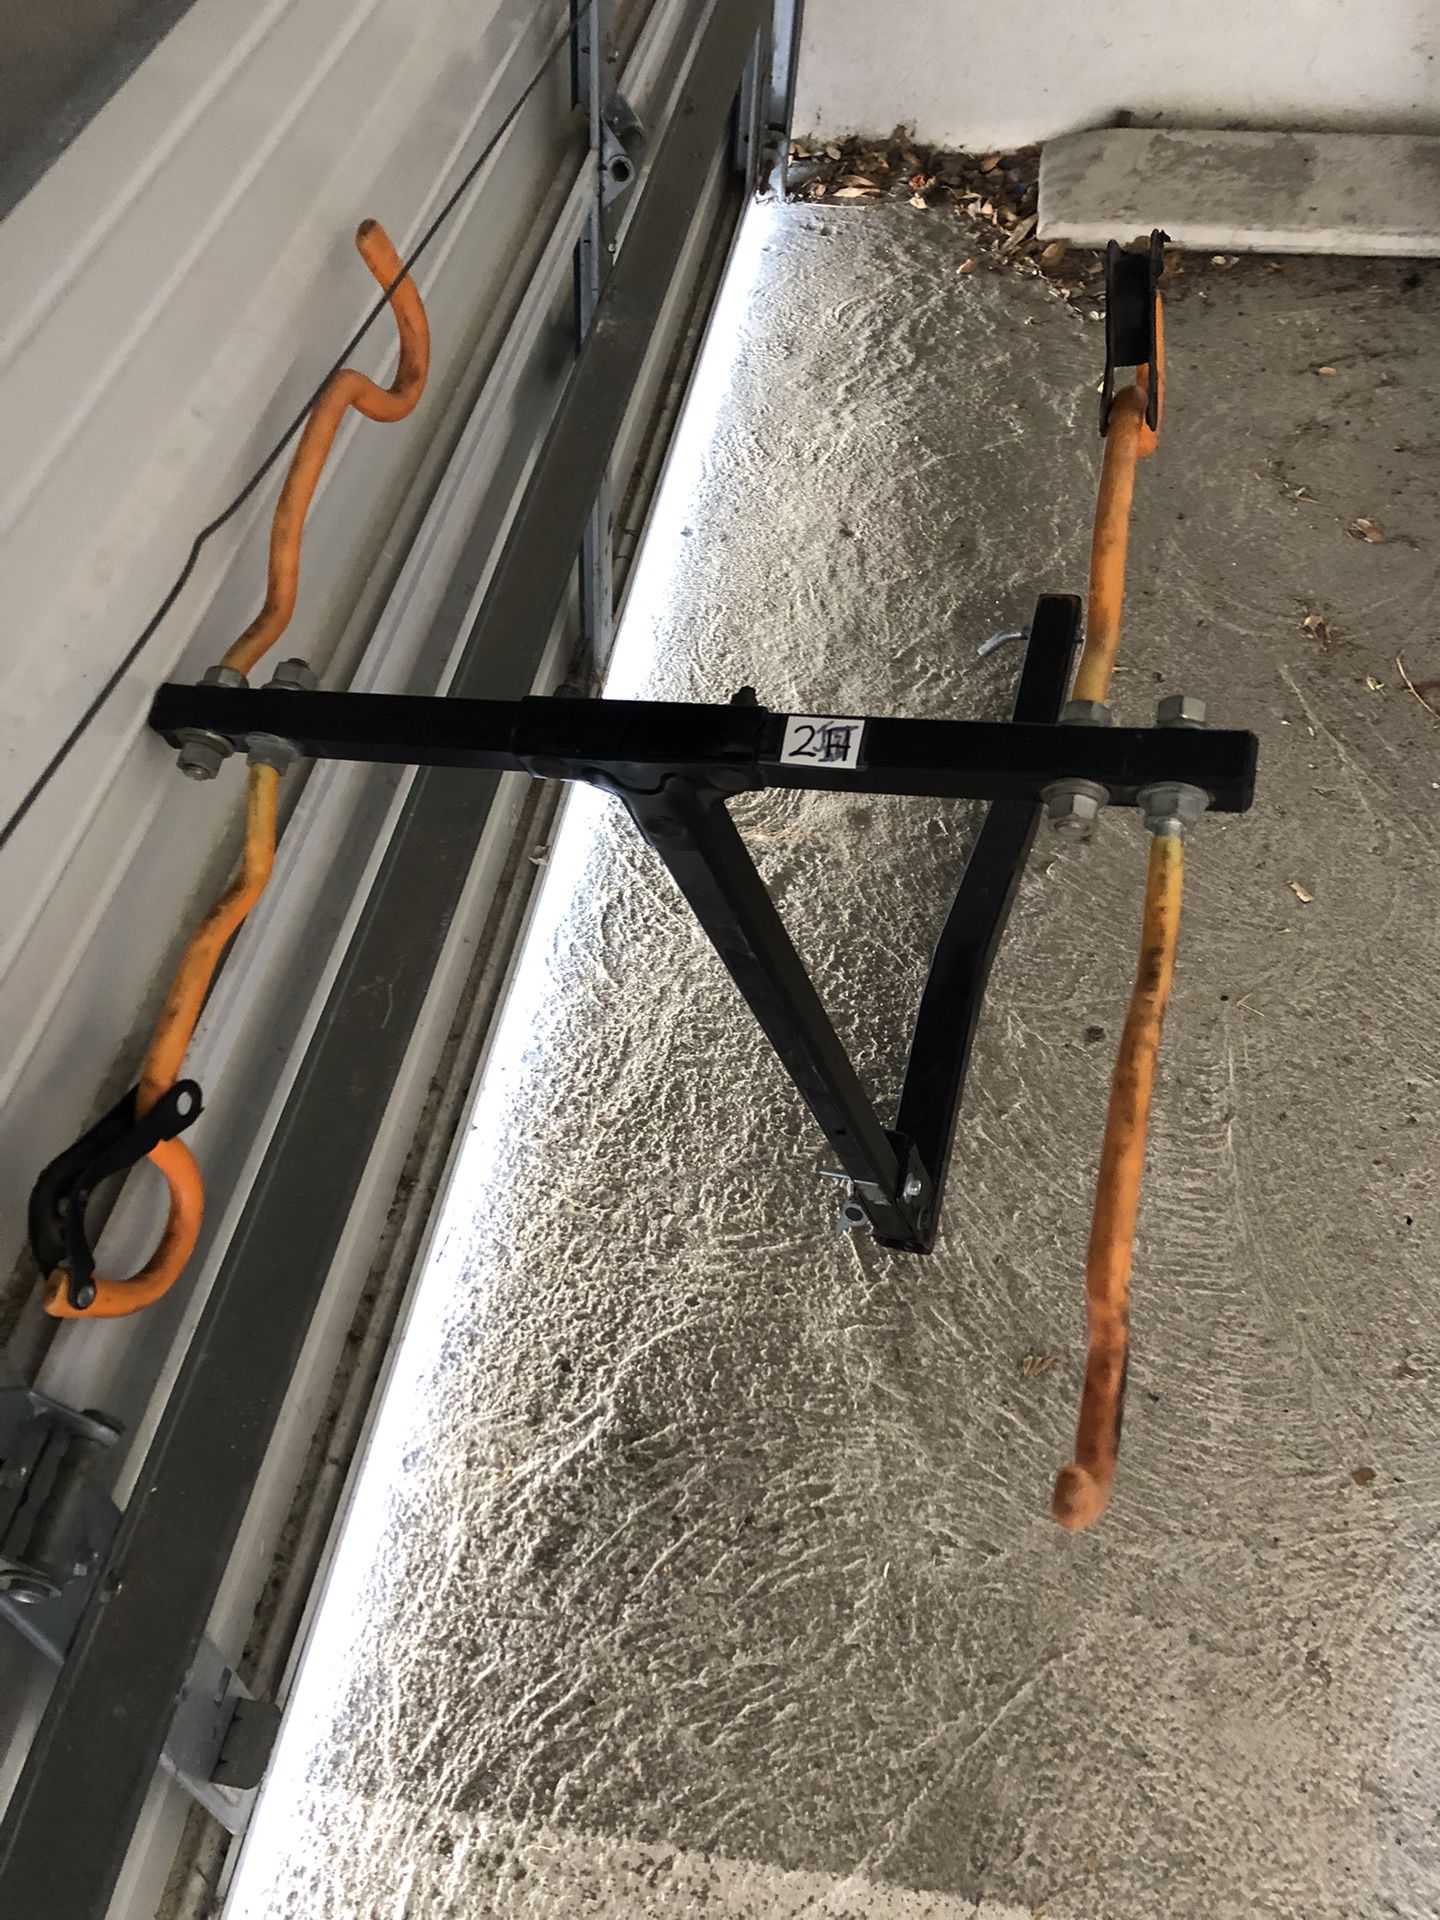 Bike rack For Standard Slide 2 1/2 Inch Hitch Folds down For Easy Access To Hatch Or Tailgate 